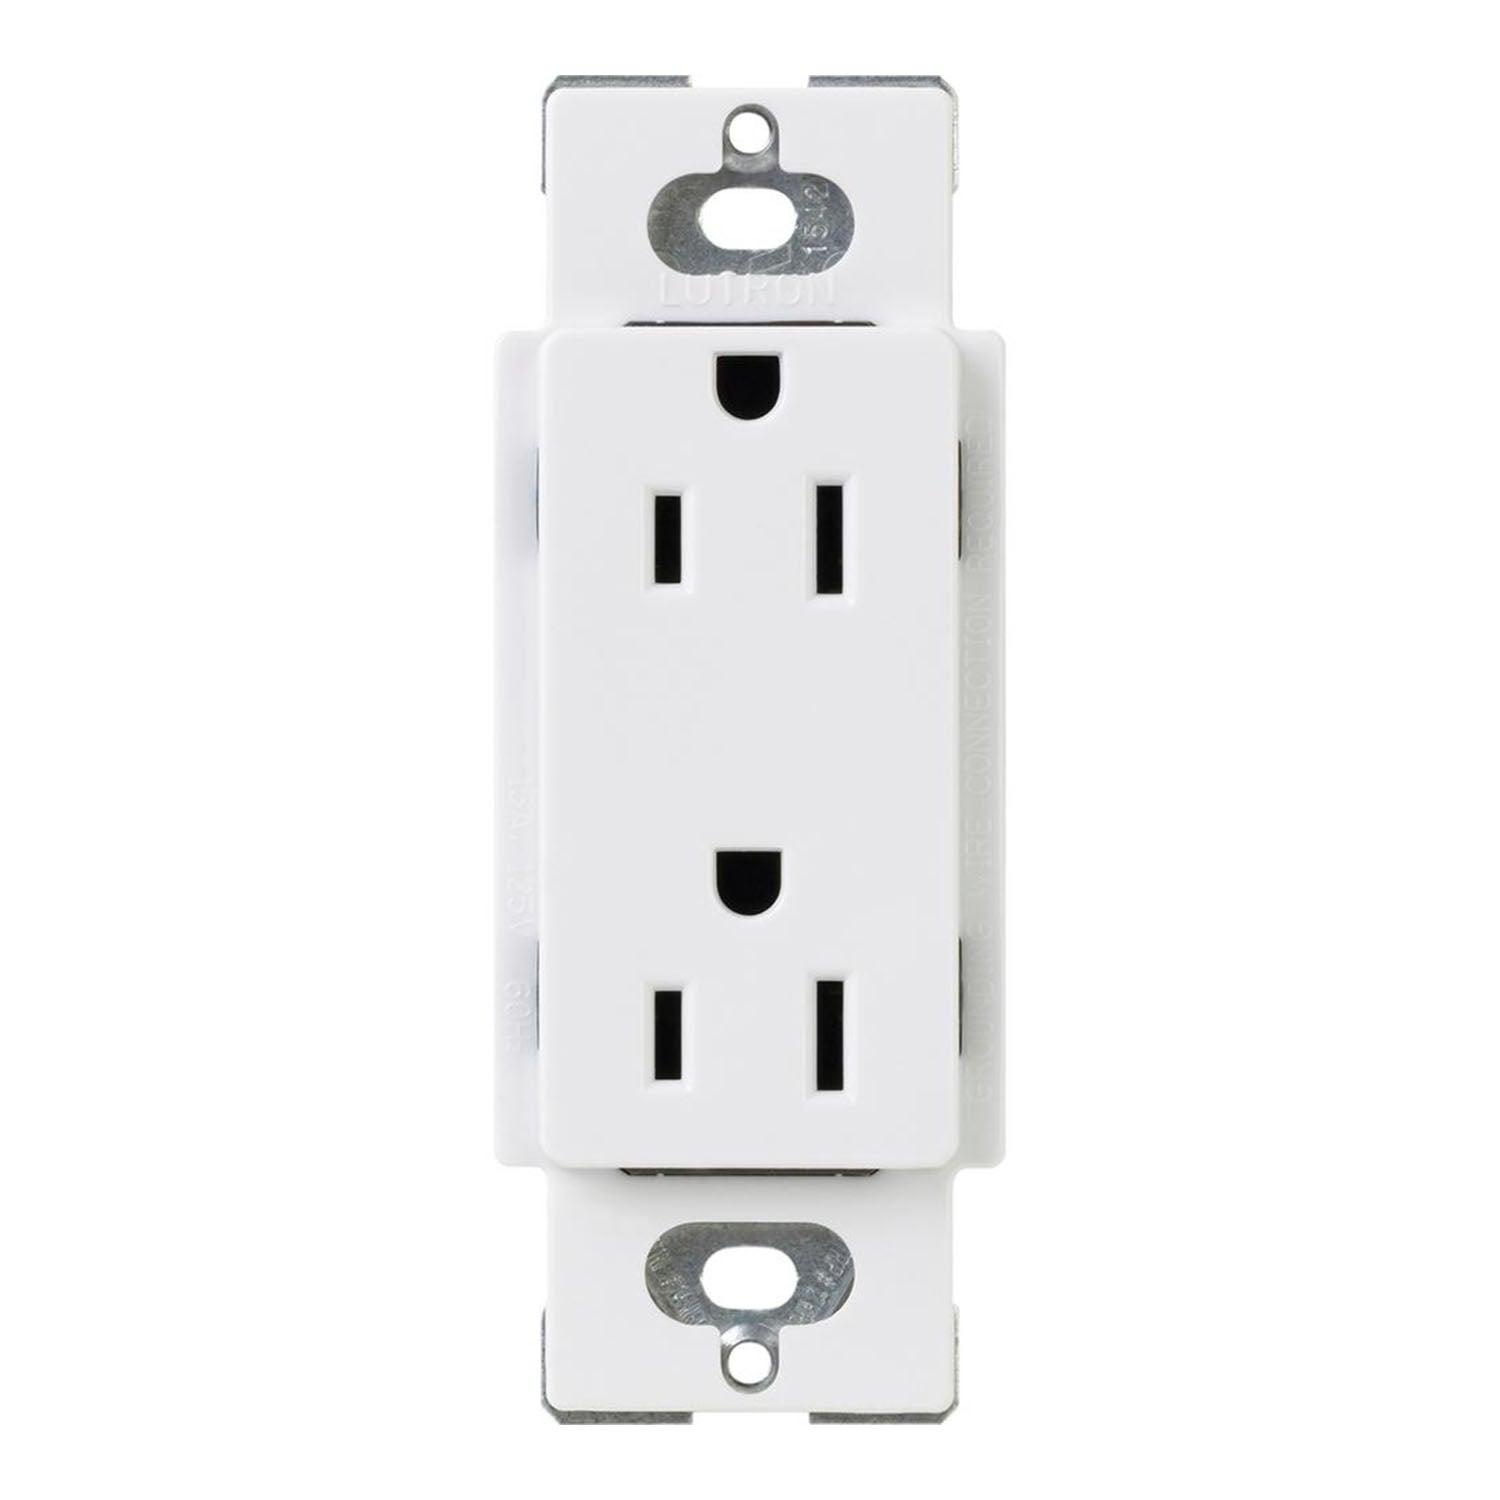 Claro 15 Amp Duplex Outlet White - Bees Lighting